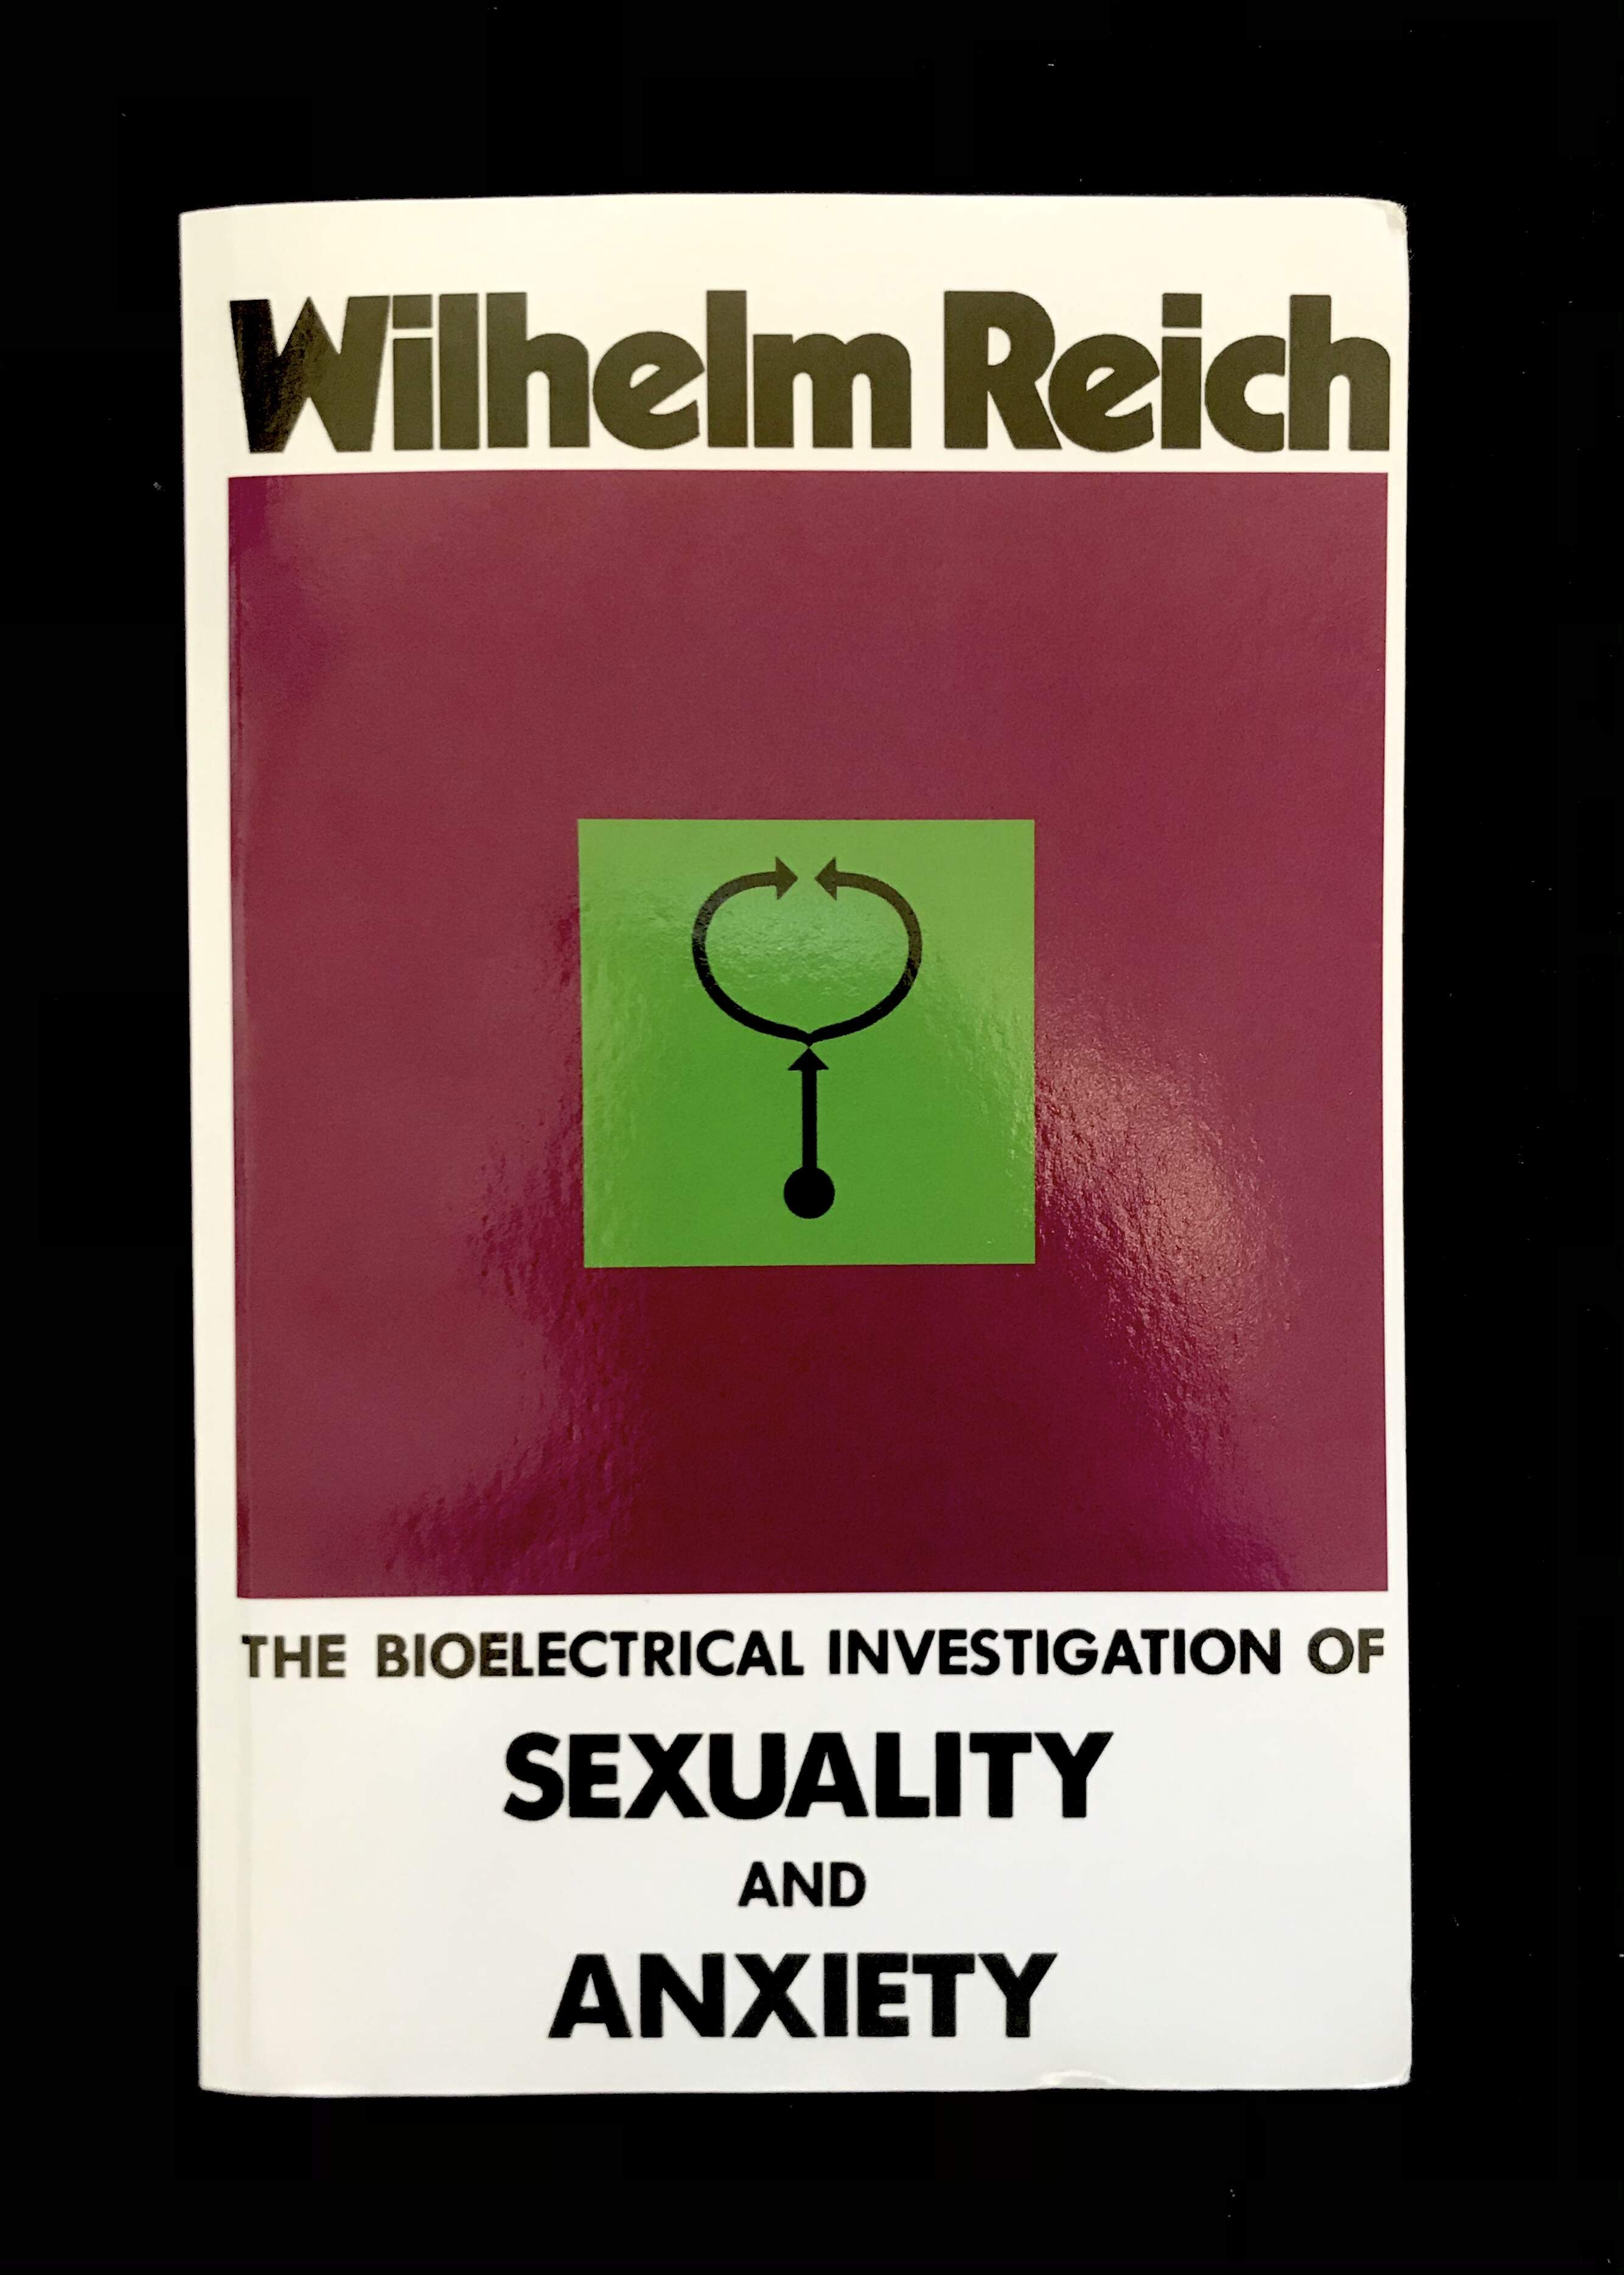 The Bioelectrical Investigation of Sexuality & Anxiety by Wilhelm Reich